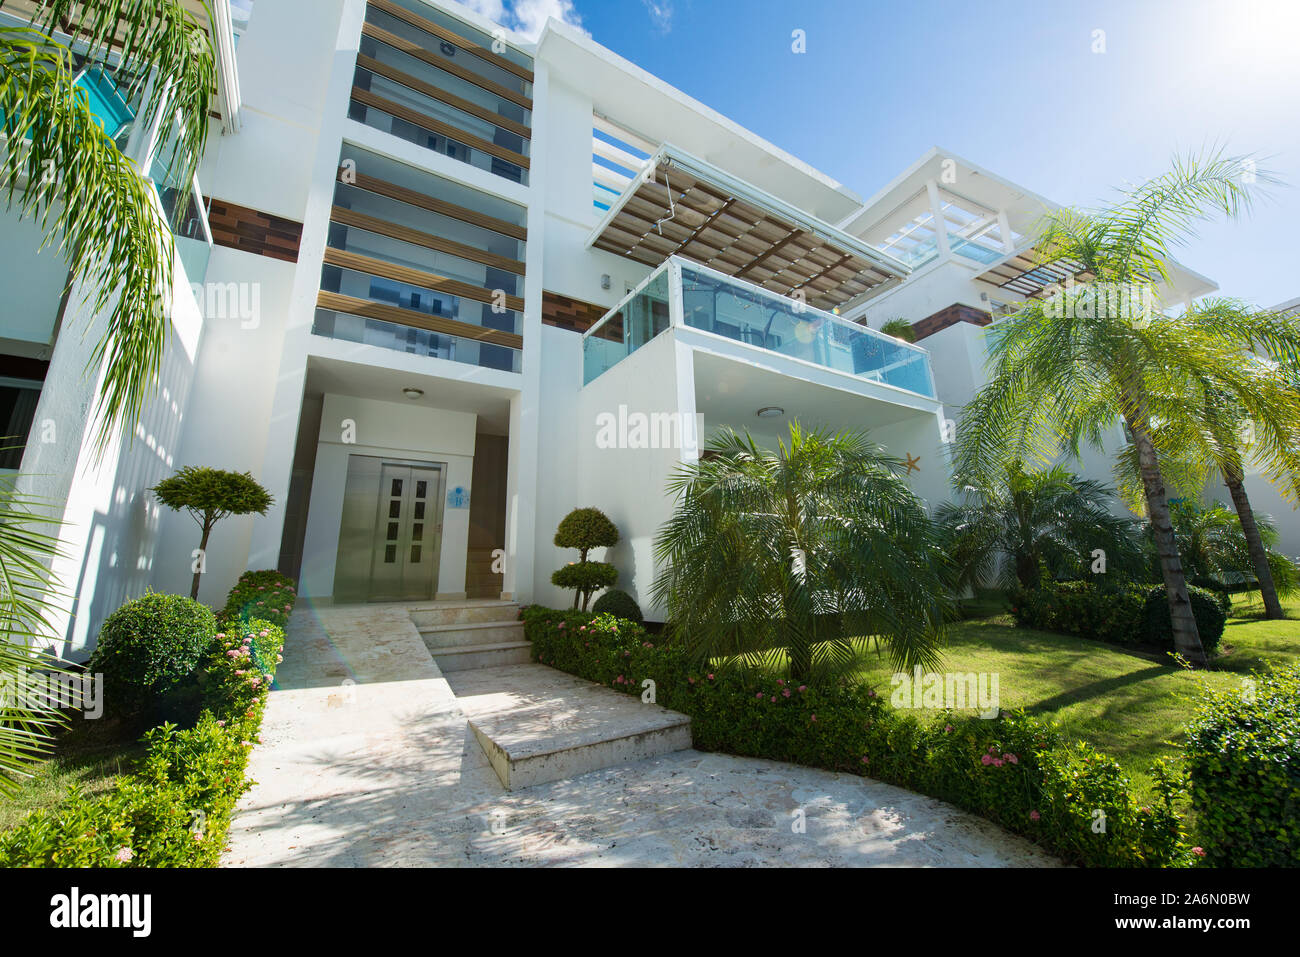 Punta Cana, La Altagracia / Dominican Republic - April 10 2014: Condominum Project Resort Looking with Palm Trees and Pools fo Rich Strangers Stock Photo